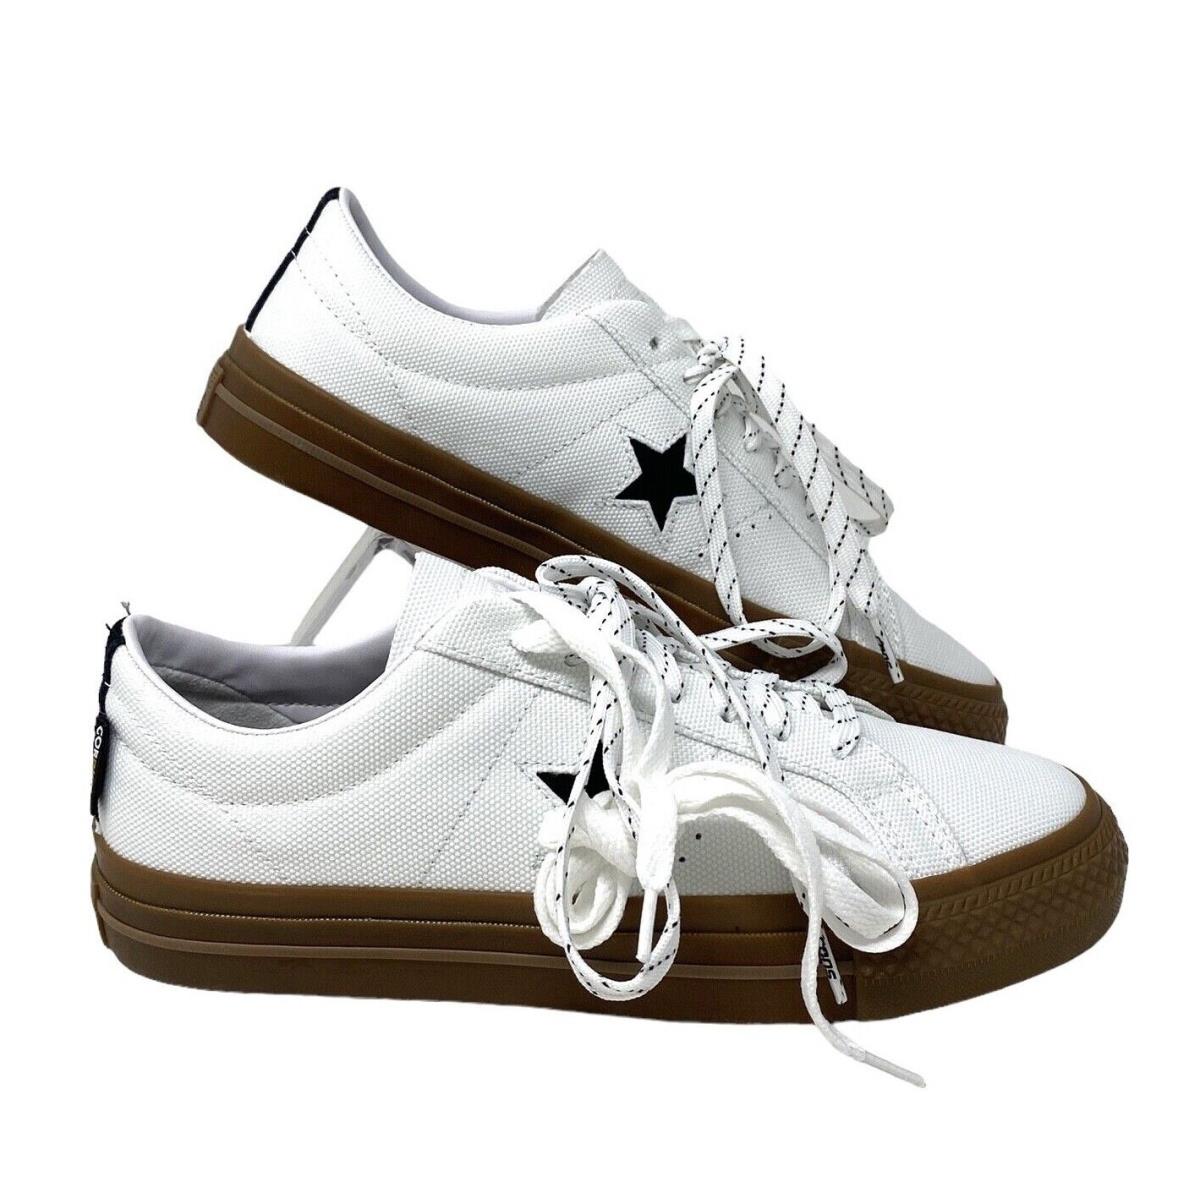 Converse One Star Pro OX Low Top White Women Canvas Sneakers Skate Size A03216C